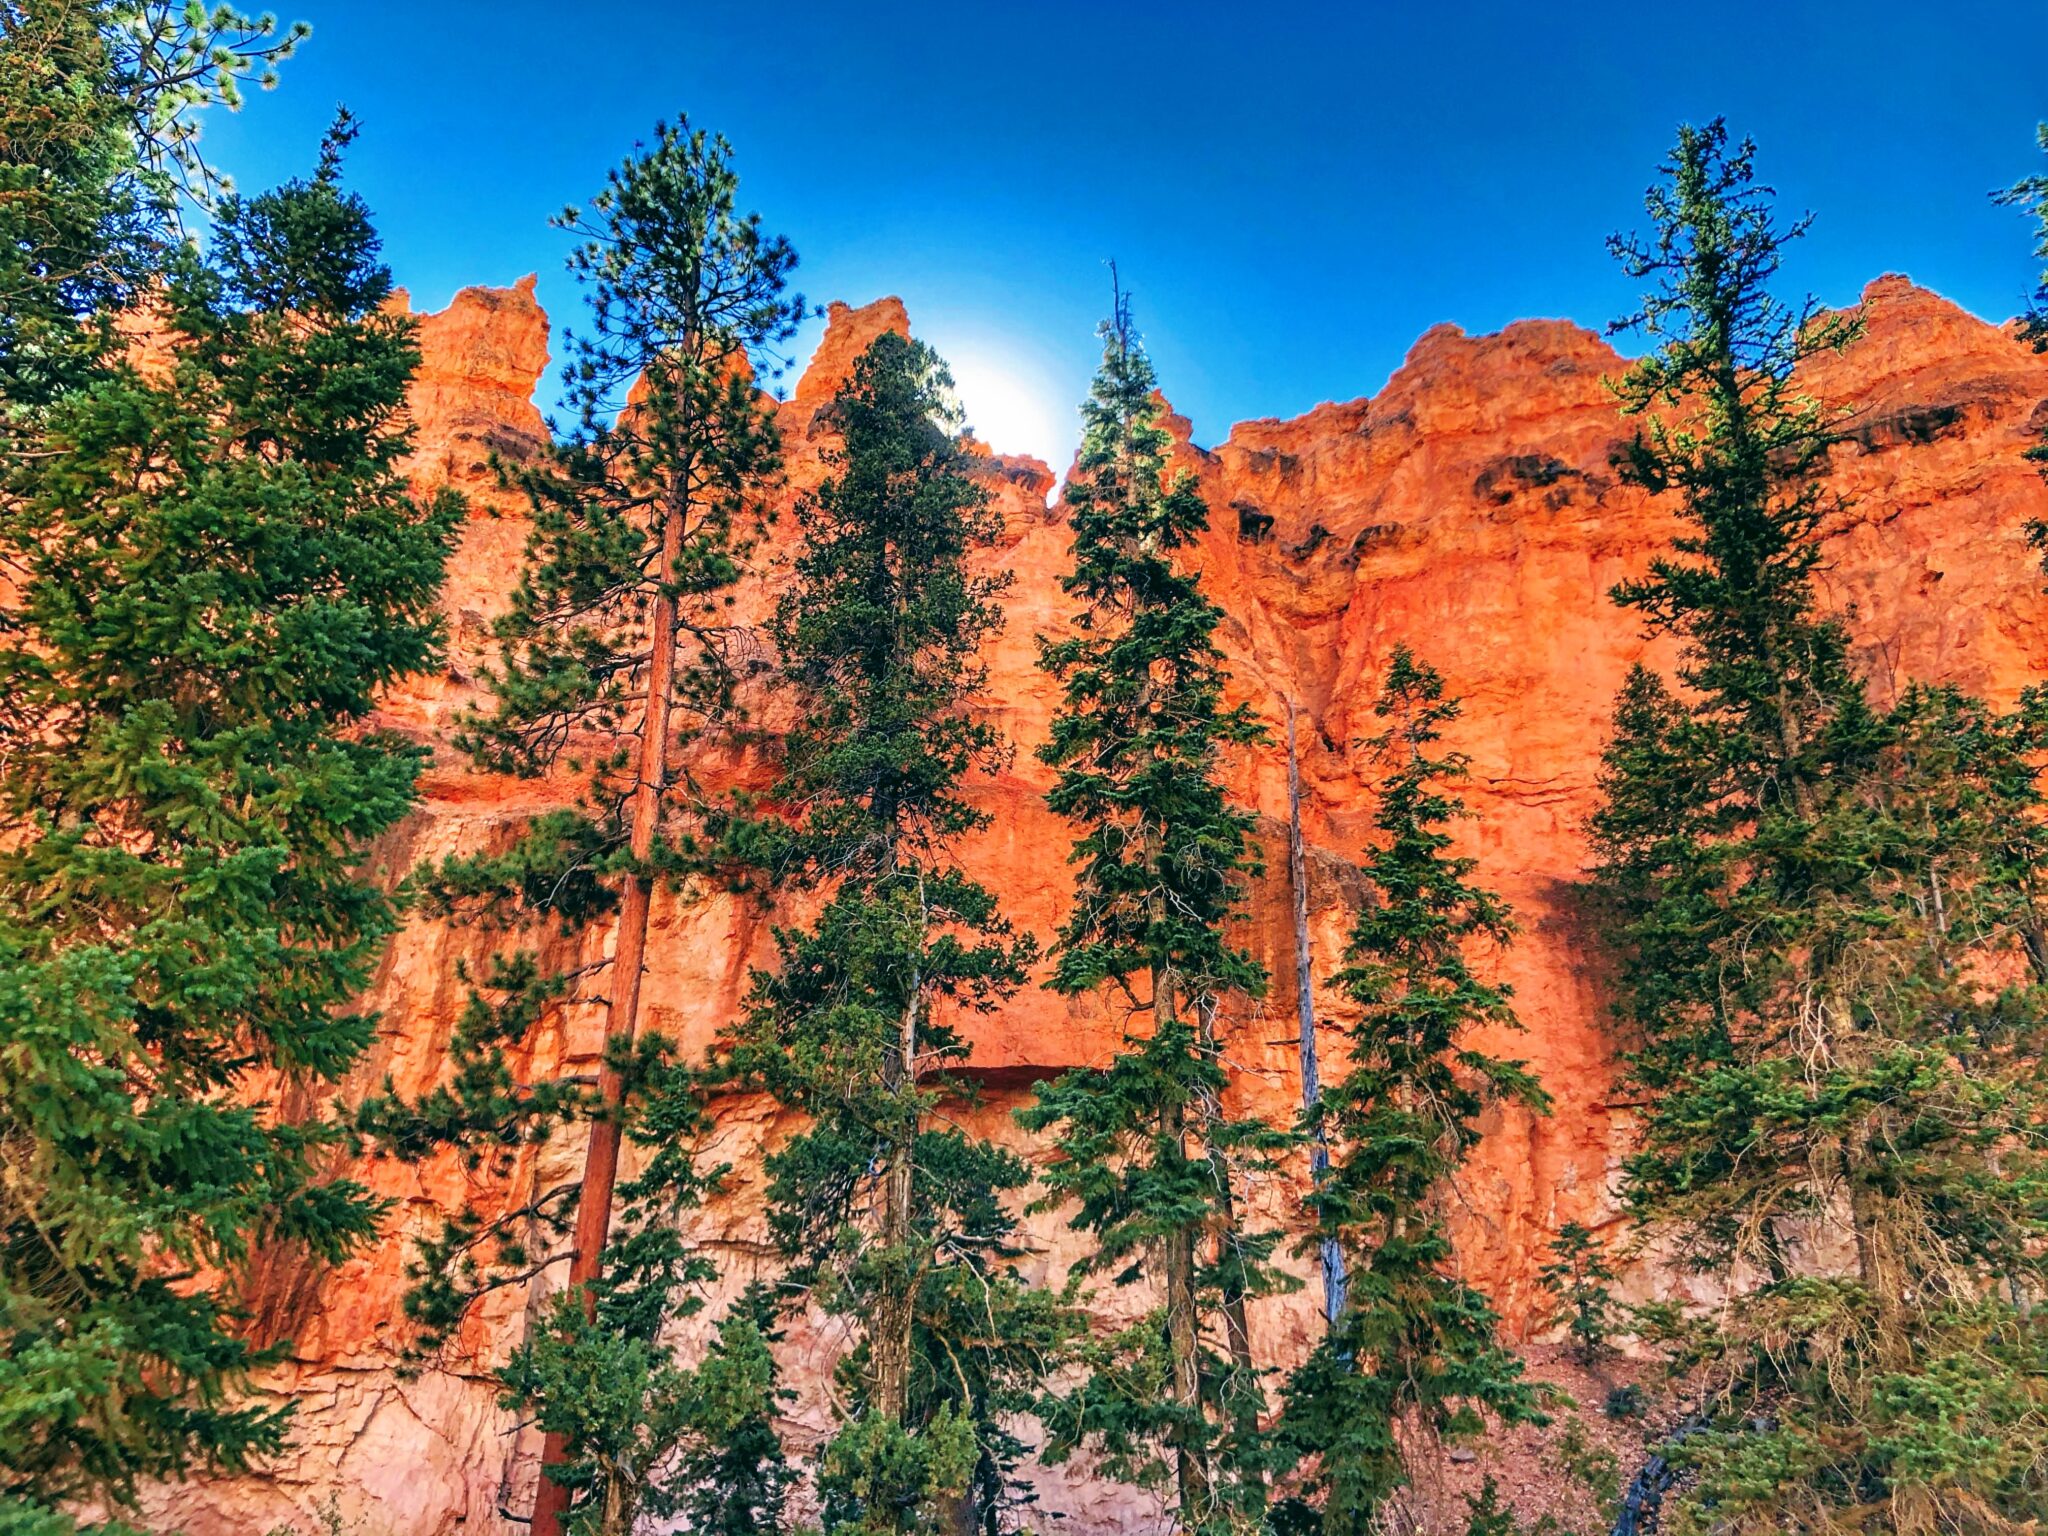 Green pine trees with red rock behind them in Bryce Canyon